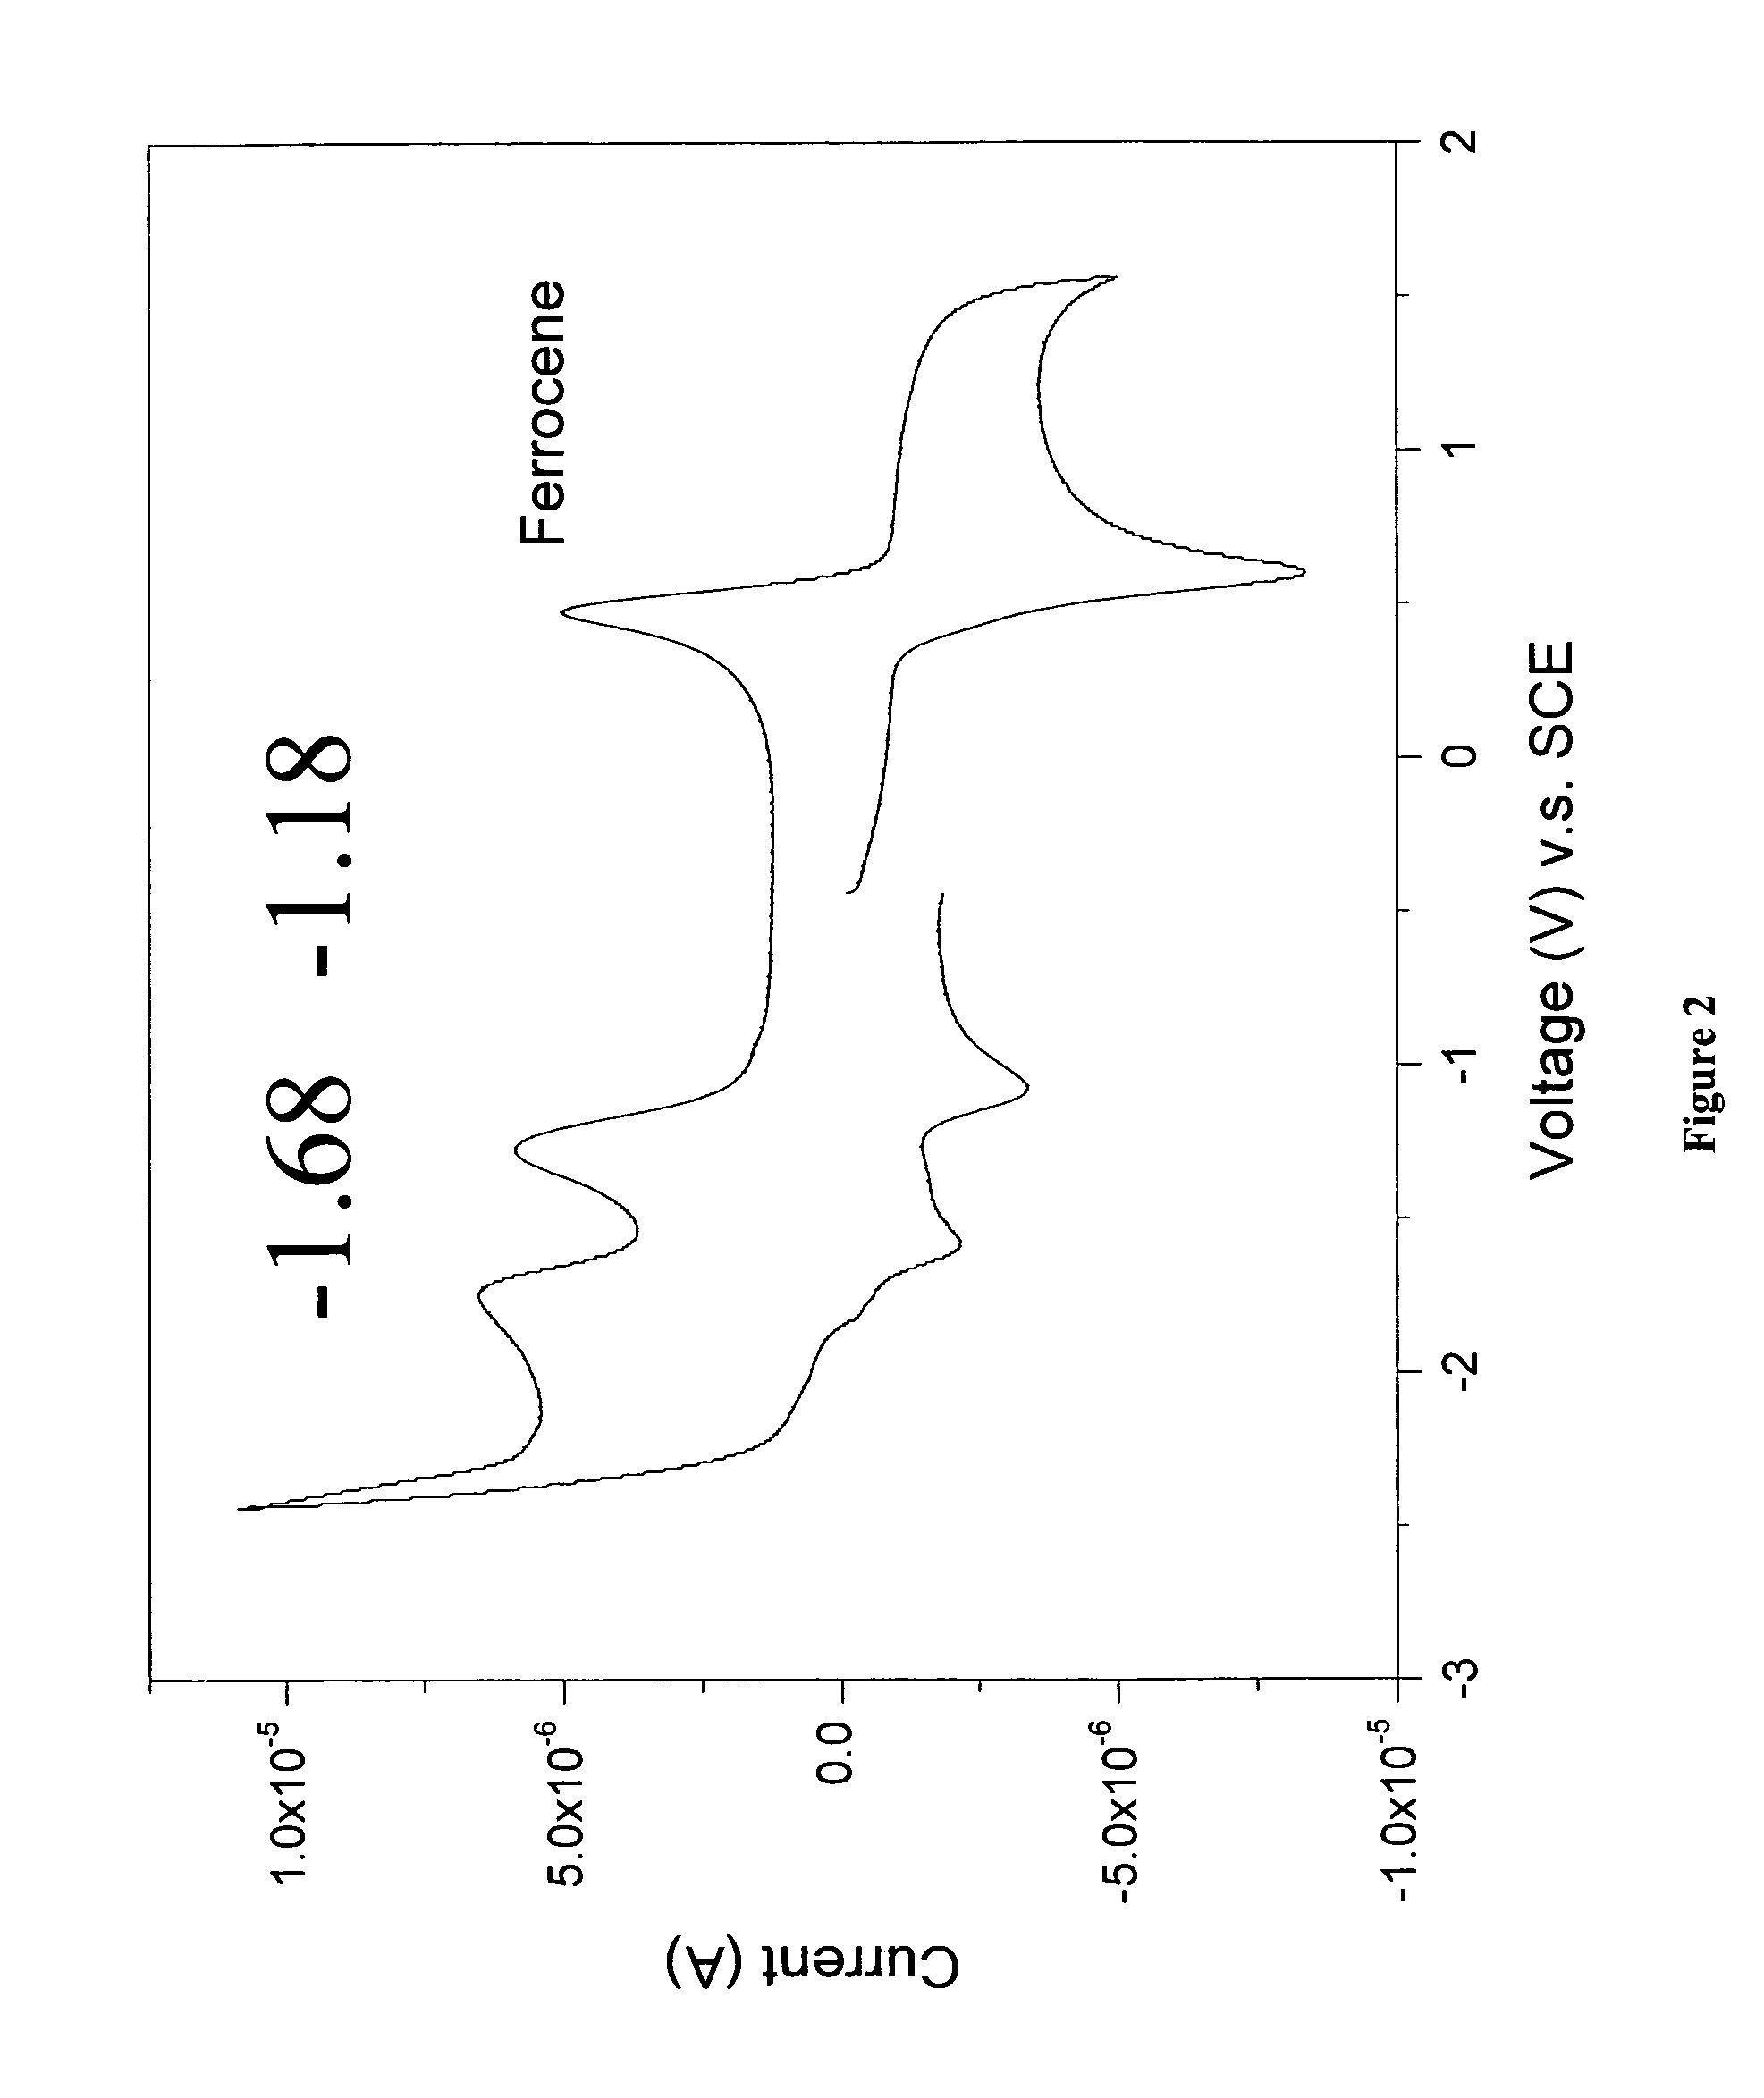 Acene-based organic semiconductor materials and methods of preparing and using the same